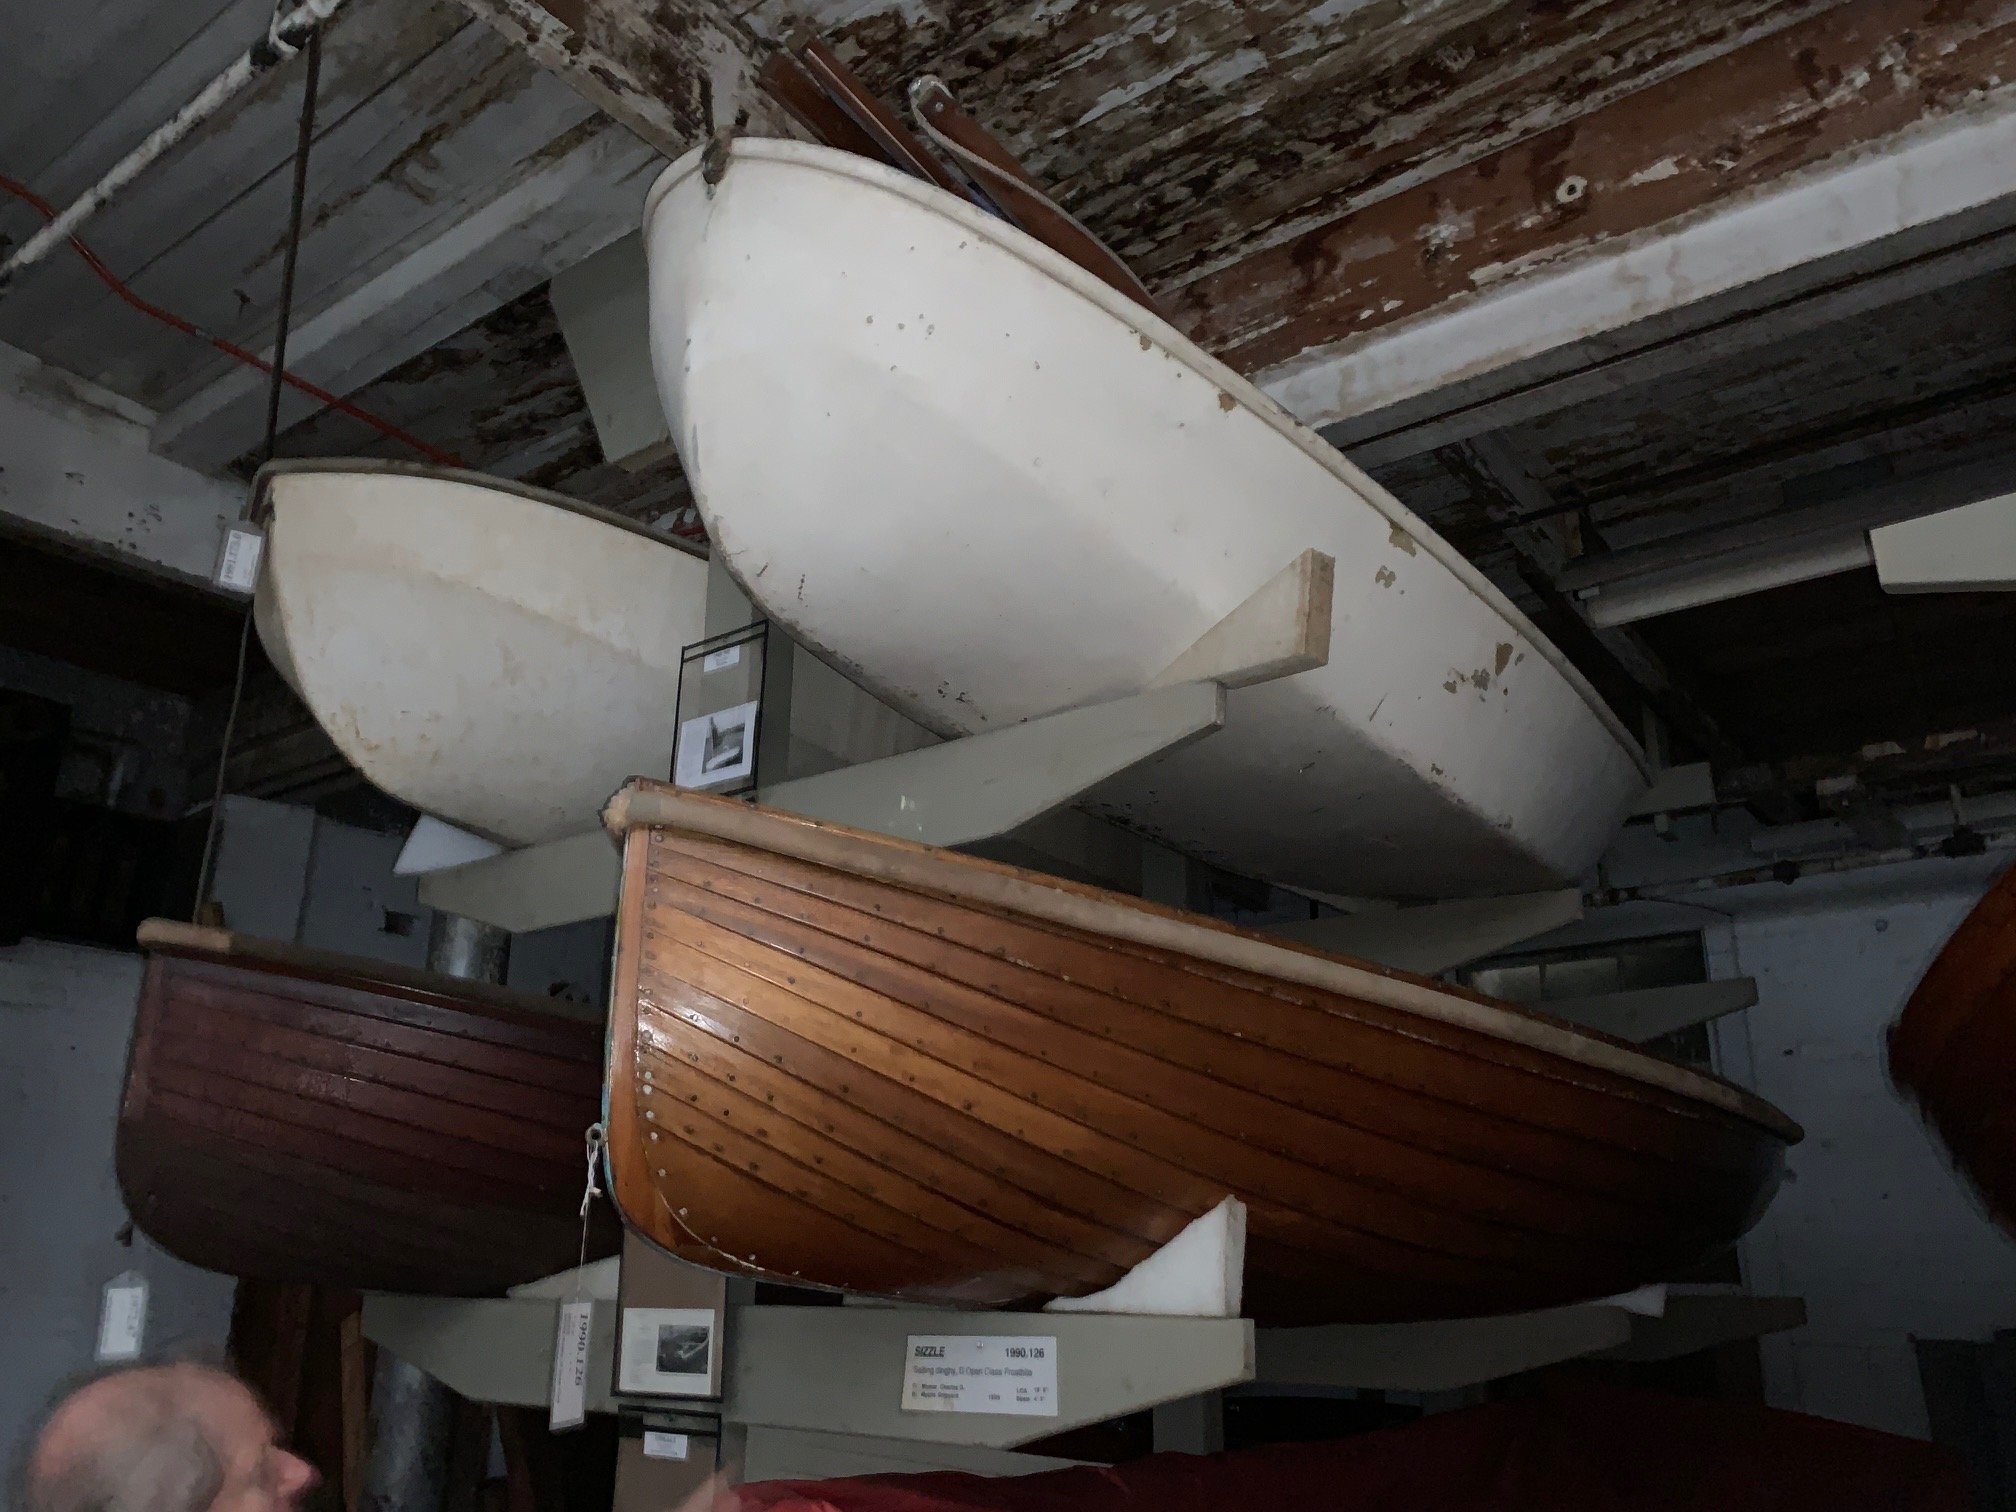 A rack full of frostbite dinghy history, the Dyer Dhow on top